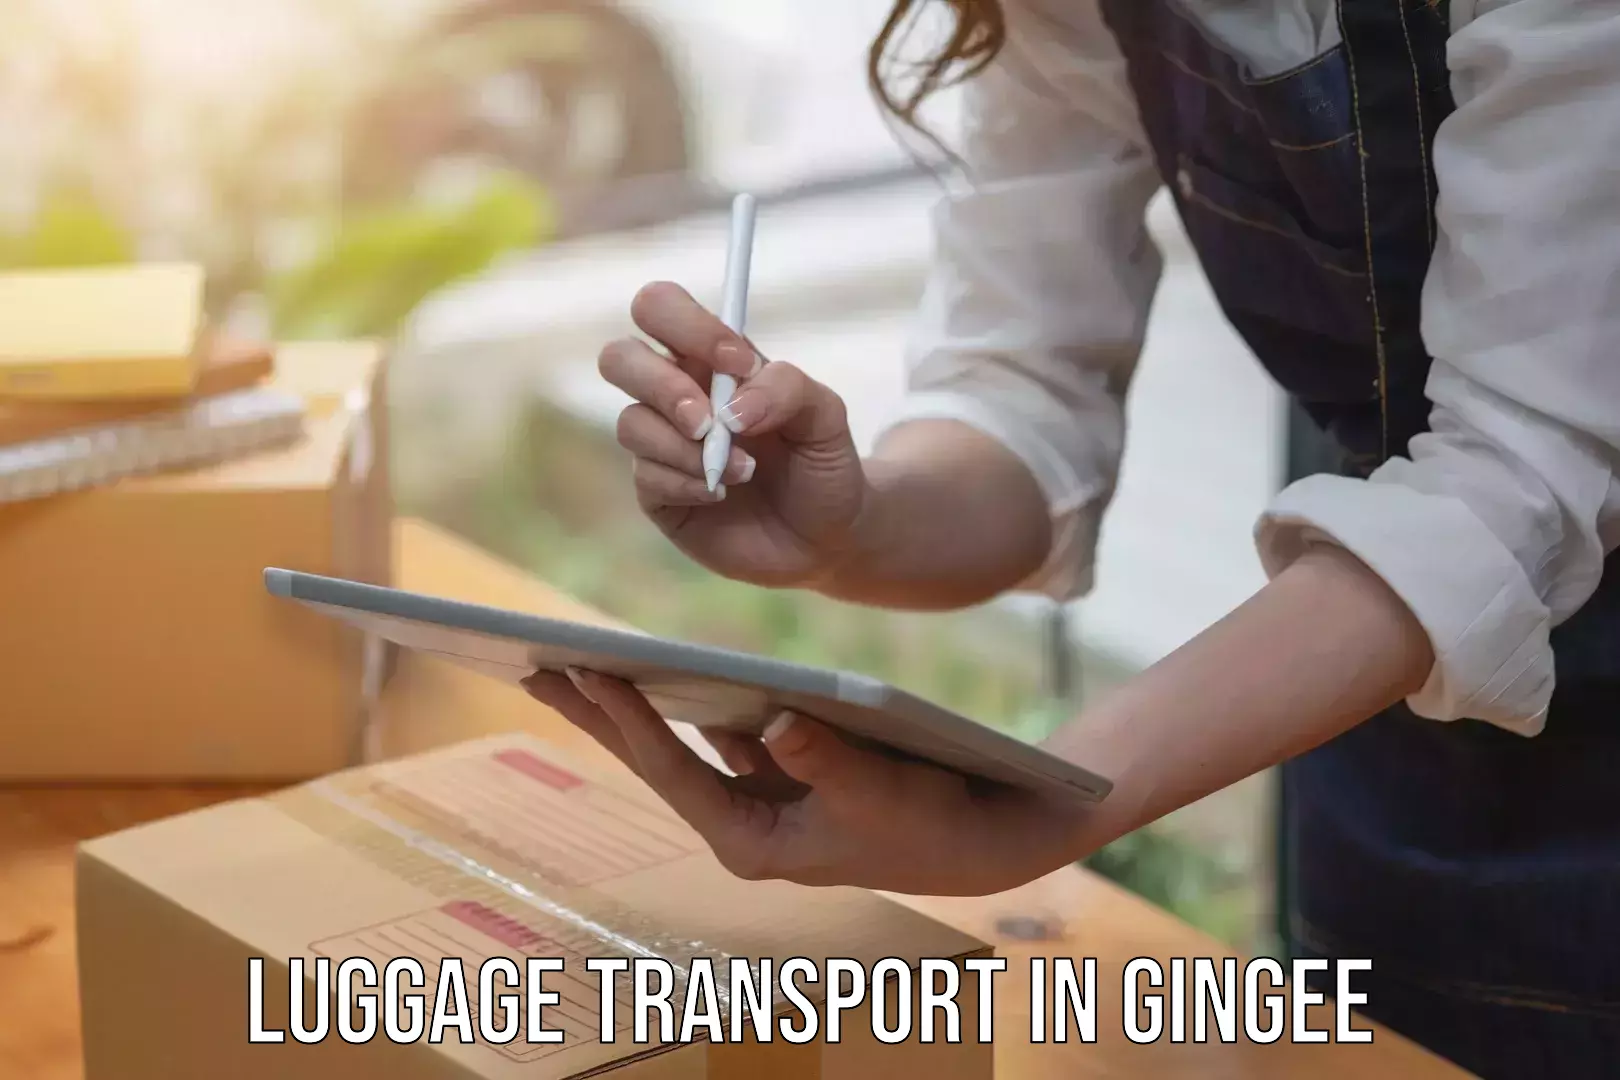 Luggage shipment tracking in Gingee